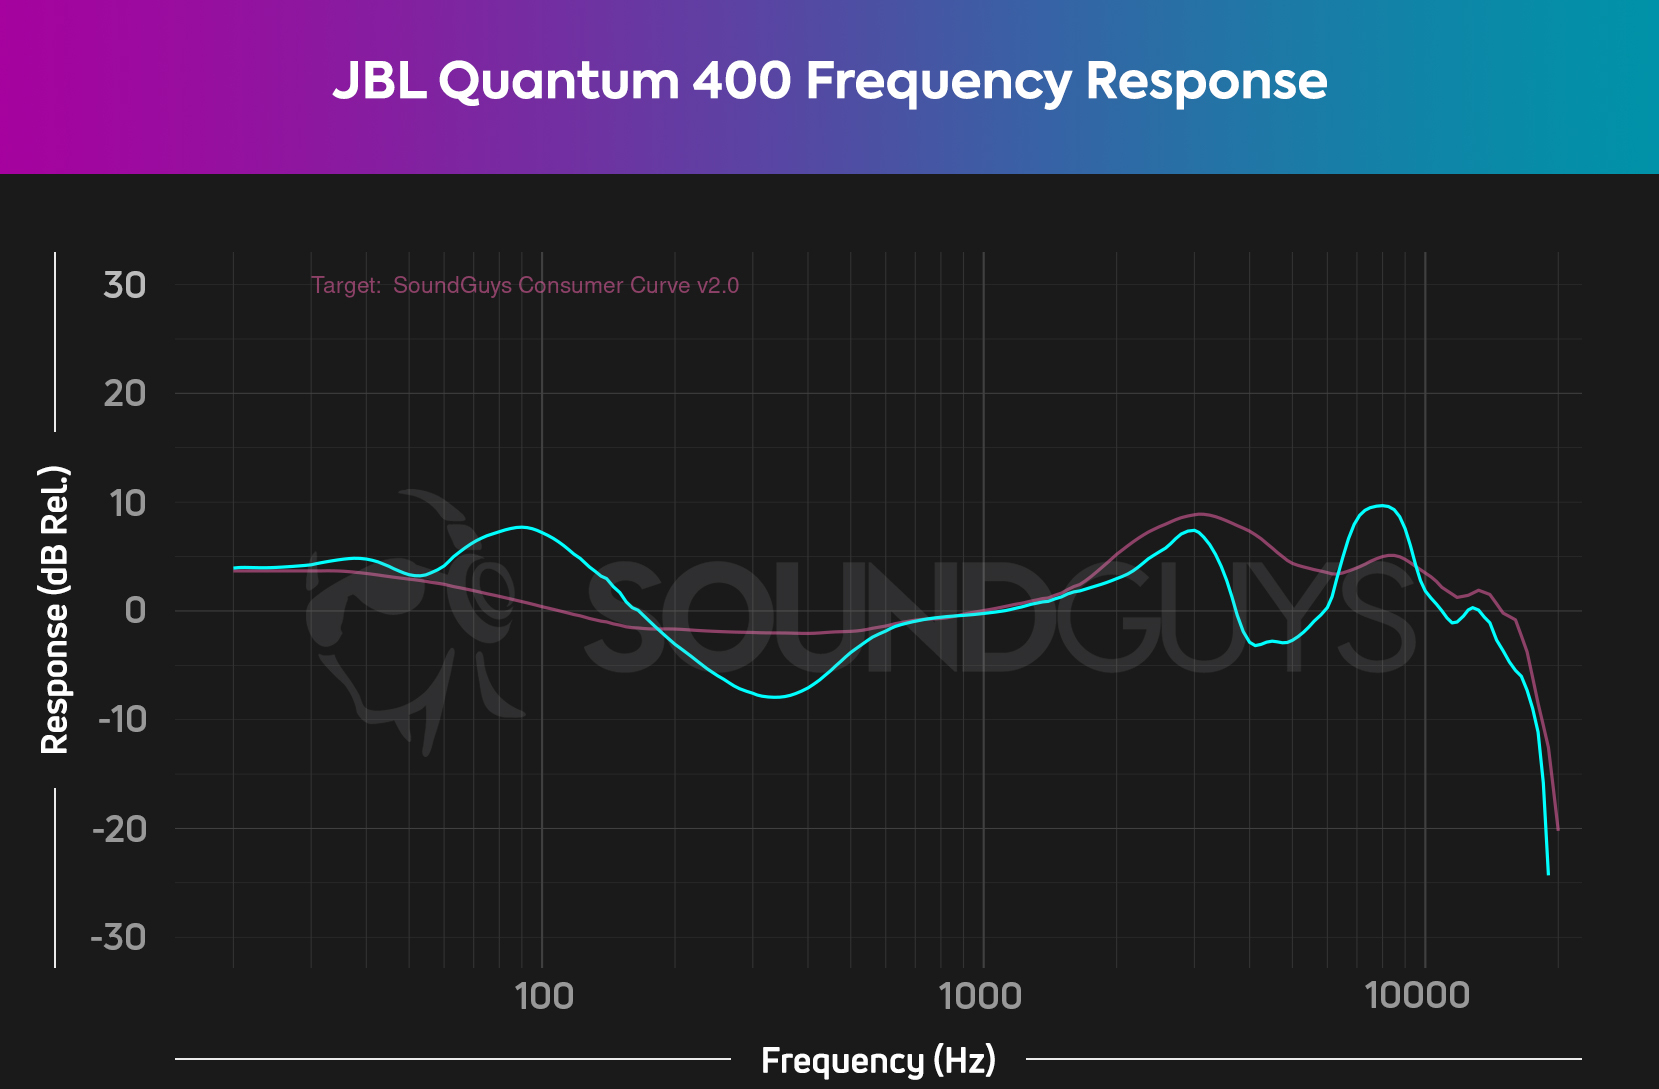 The JBL Quantum 400 frequency response chart, showing our consumer curve in comparison.